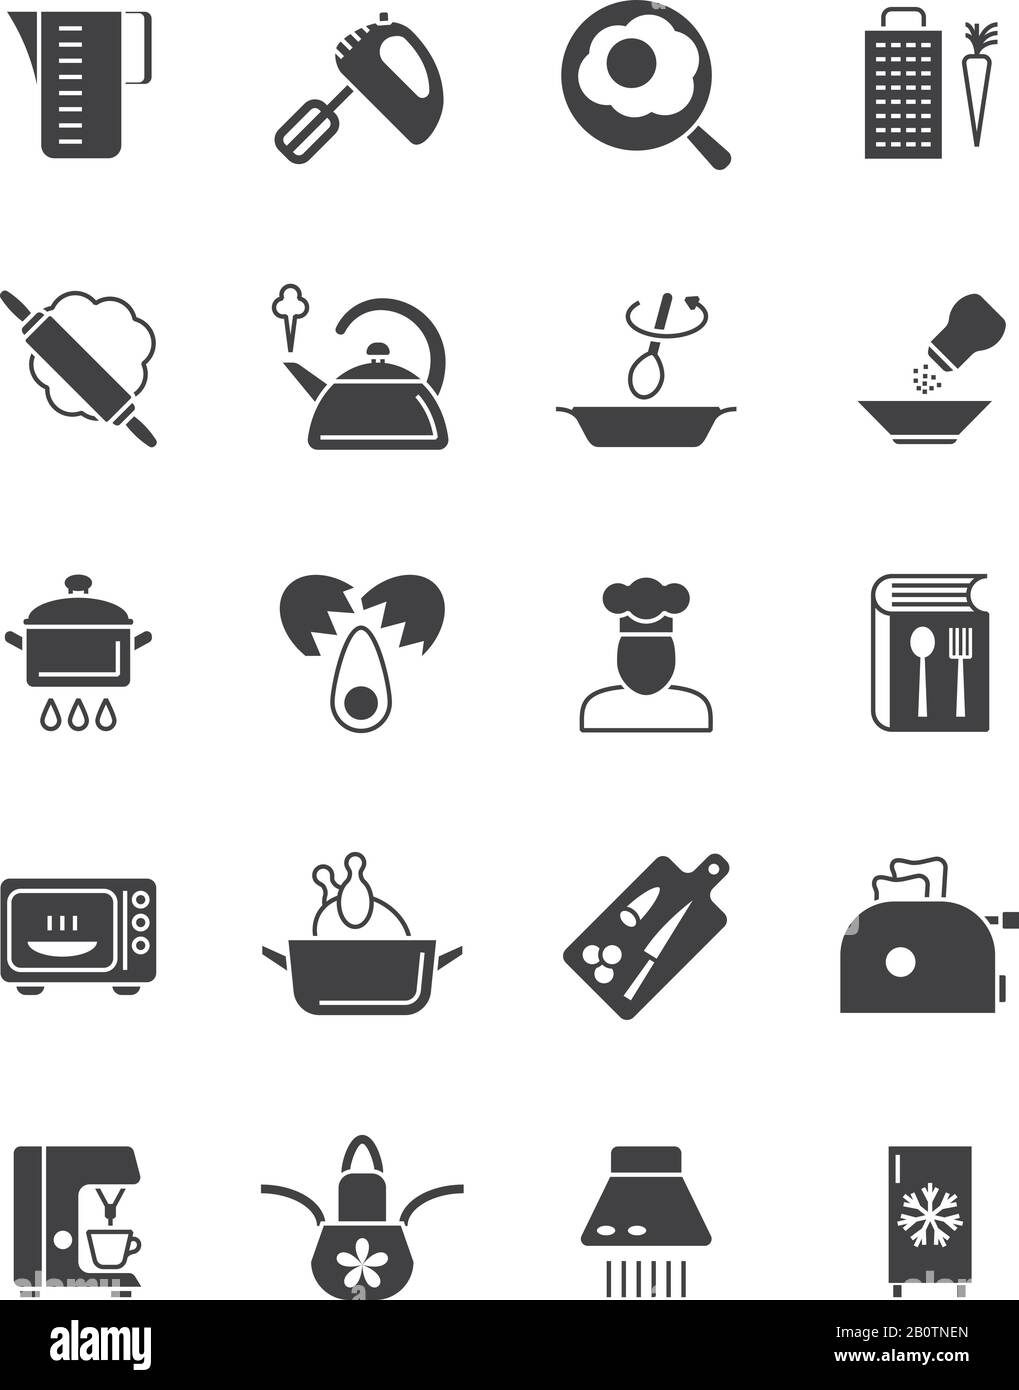 Cooking and kitchen equipment black silhouette vector icons. Cooking utensil silhouette, kitchen tool pan and pot illustration Stock Vector